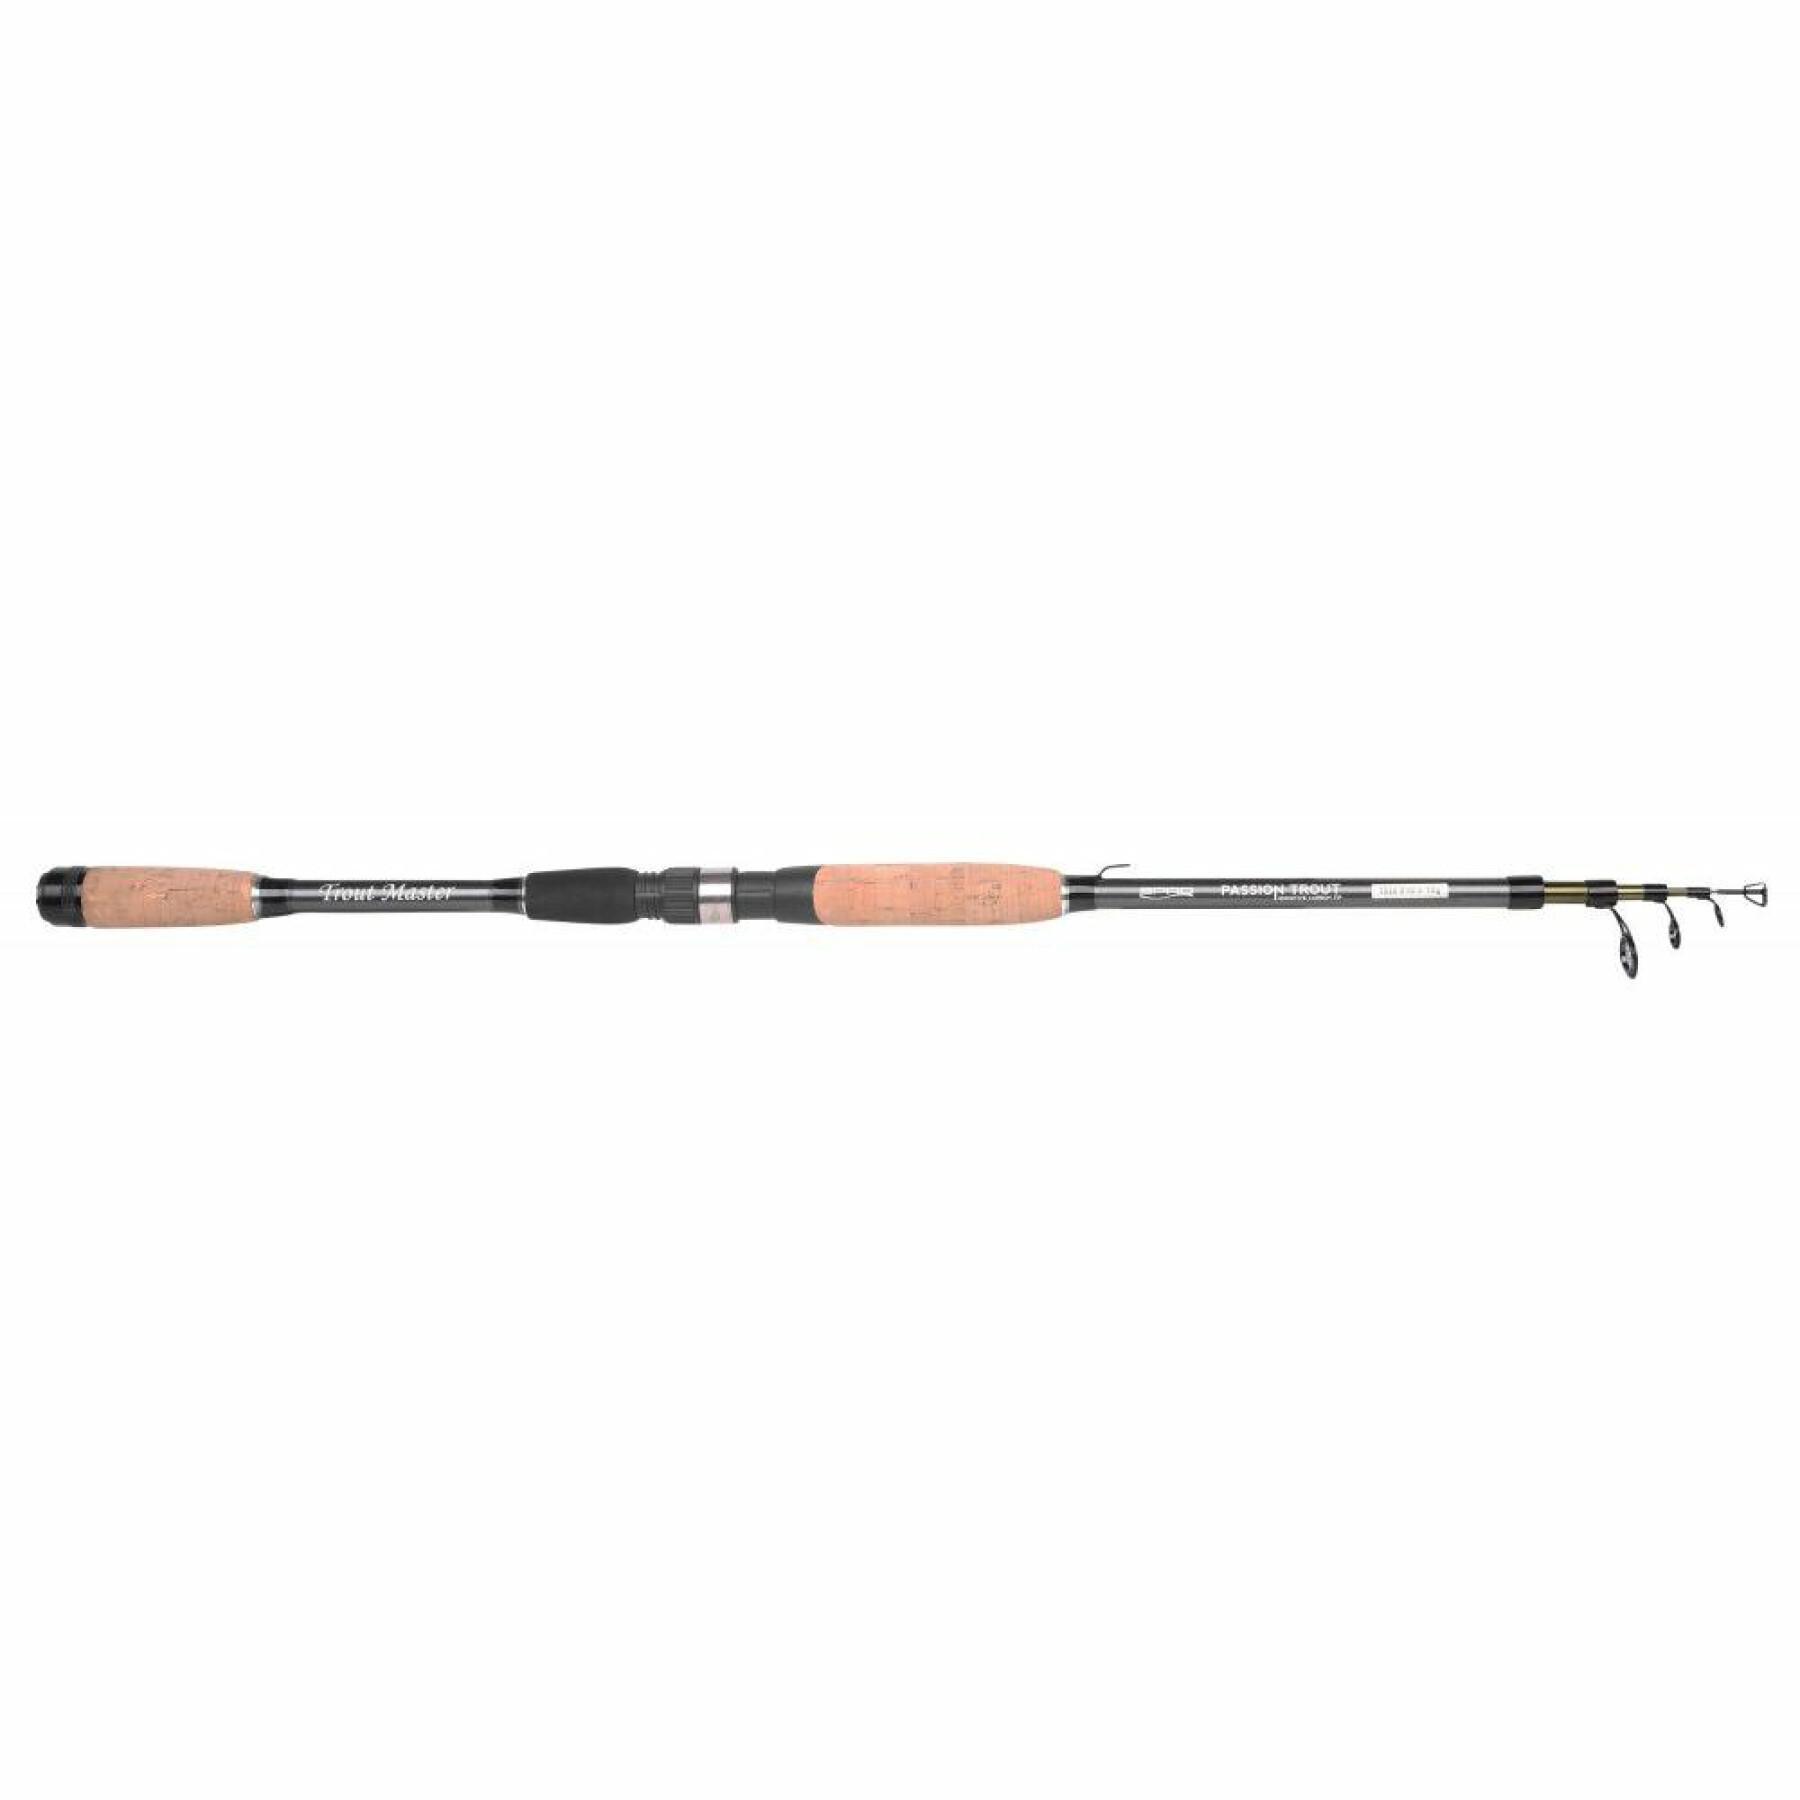 Telescopic cane Spro passion trout 3-10g